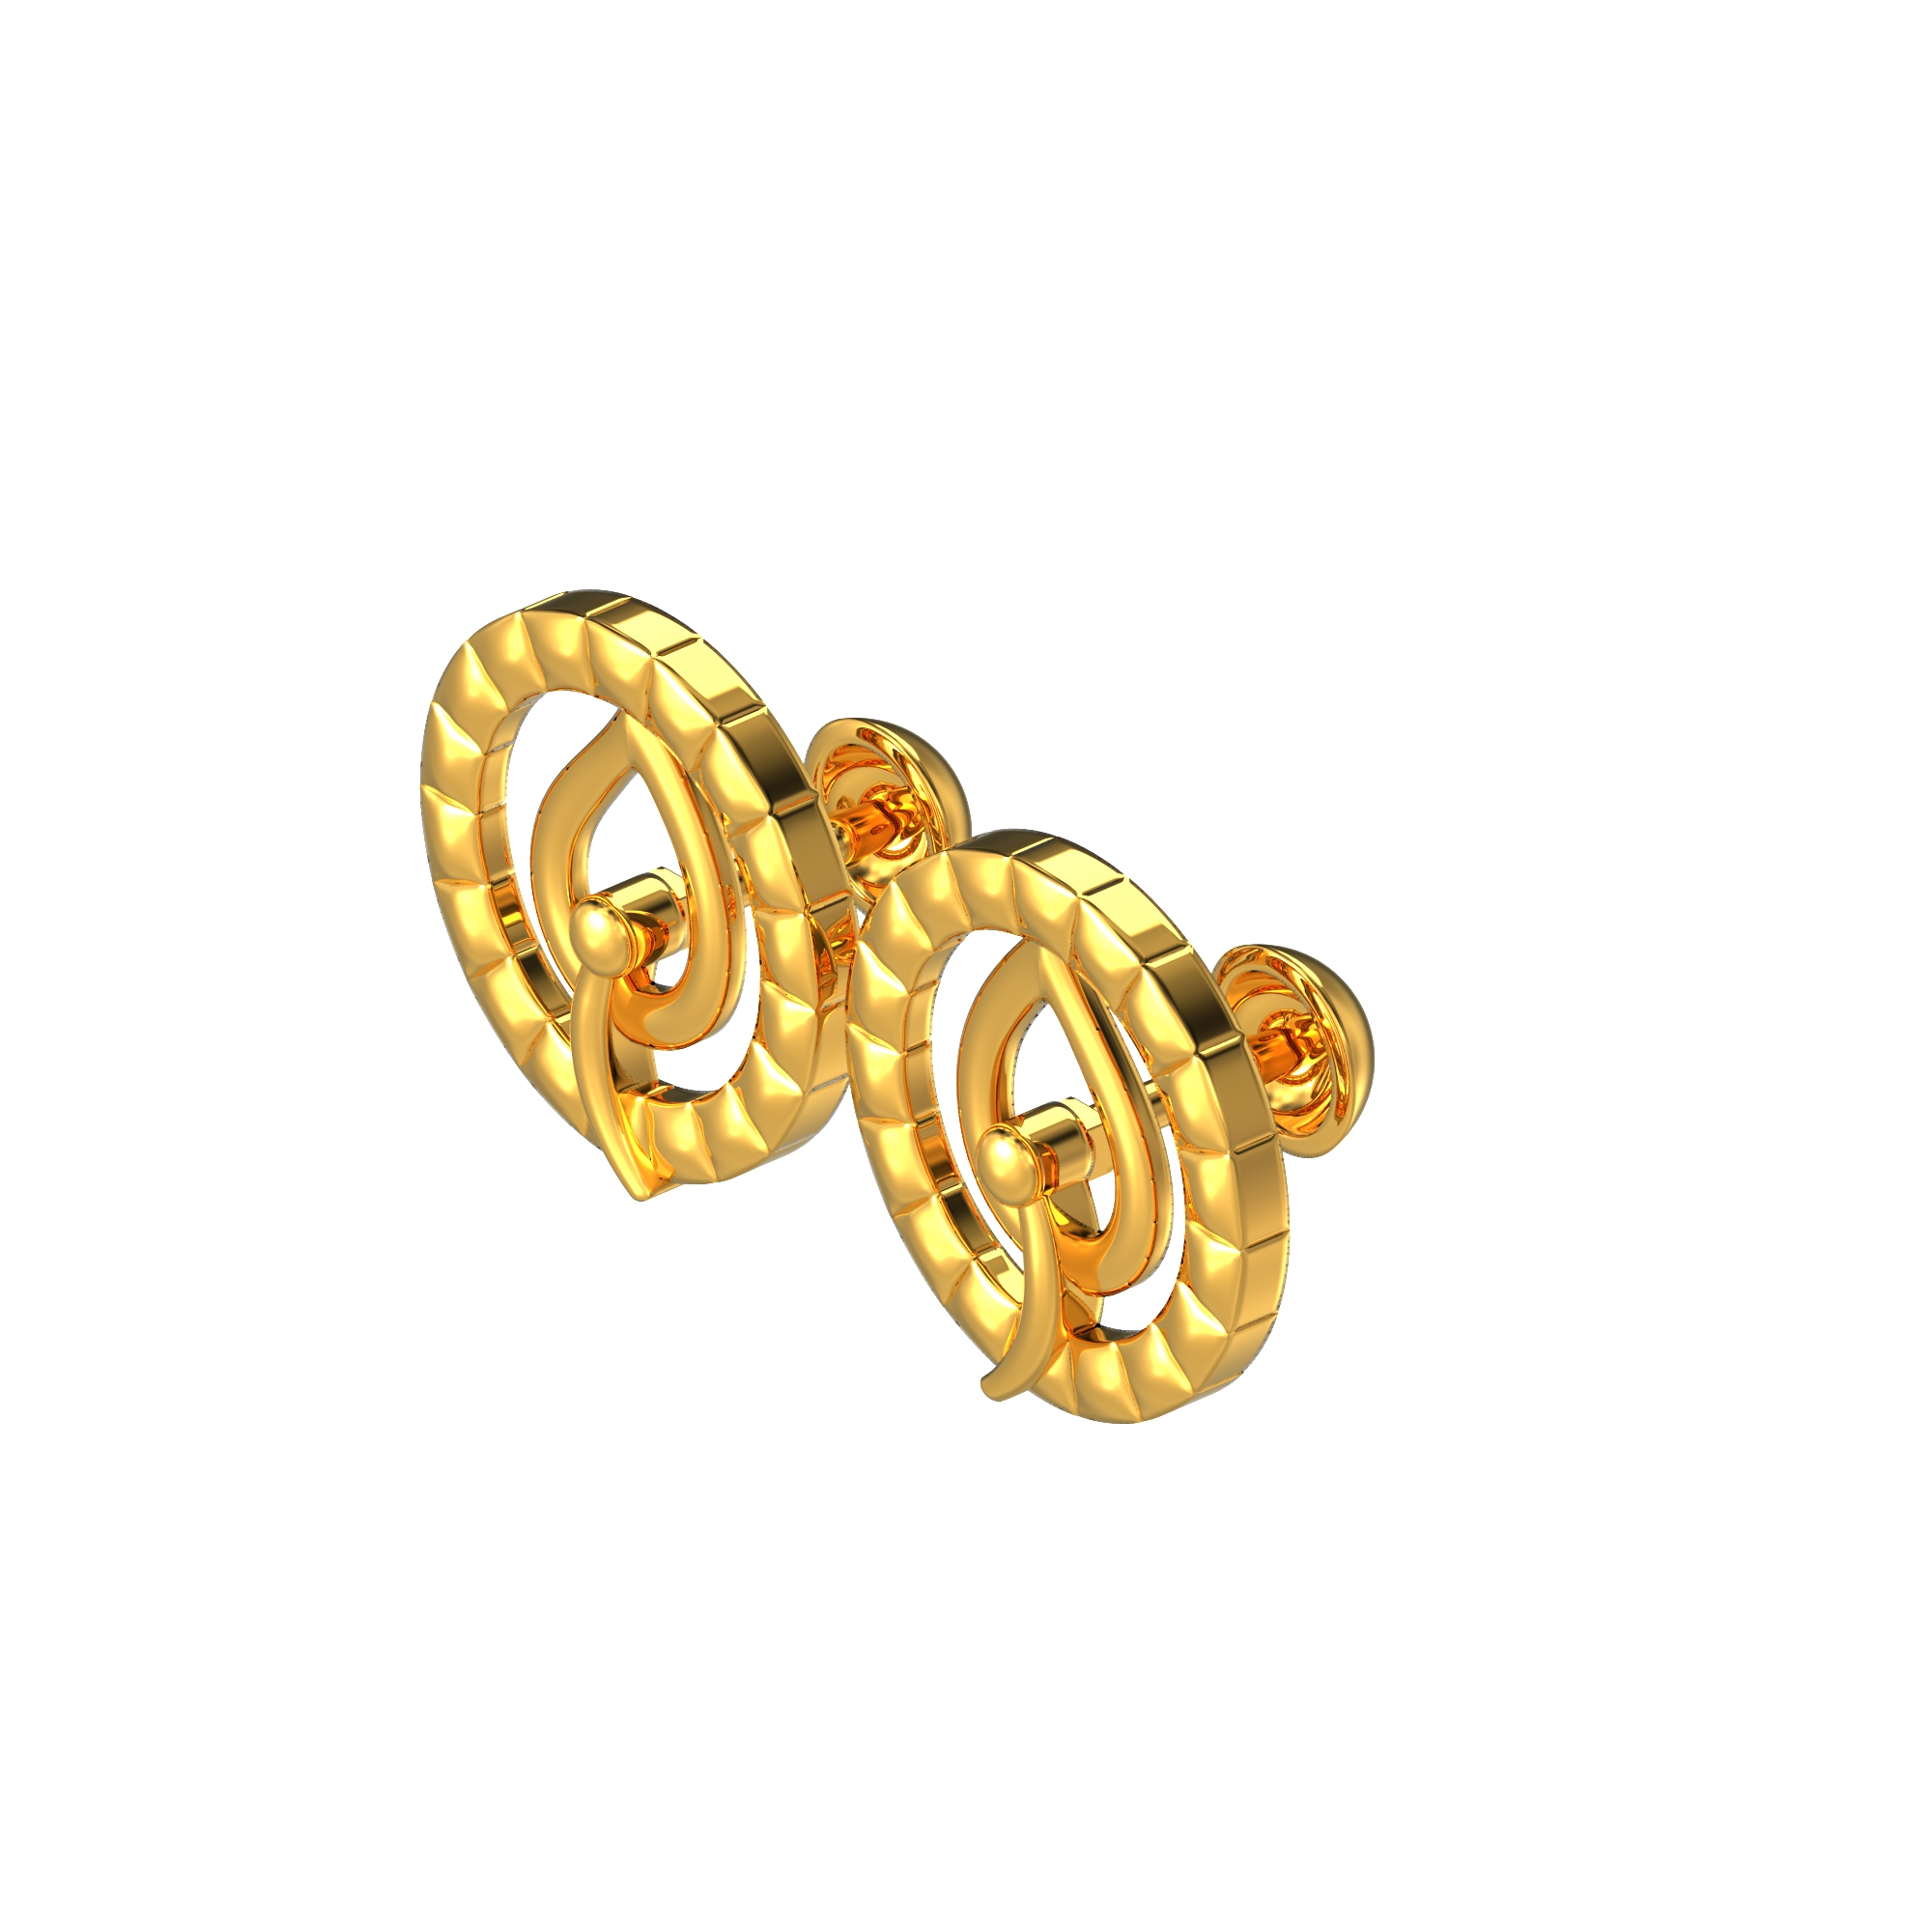 Wholesale gold jewellery manufacturers in kundrathur